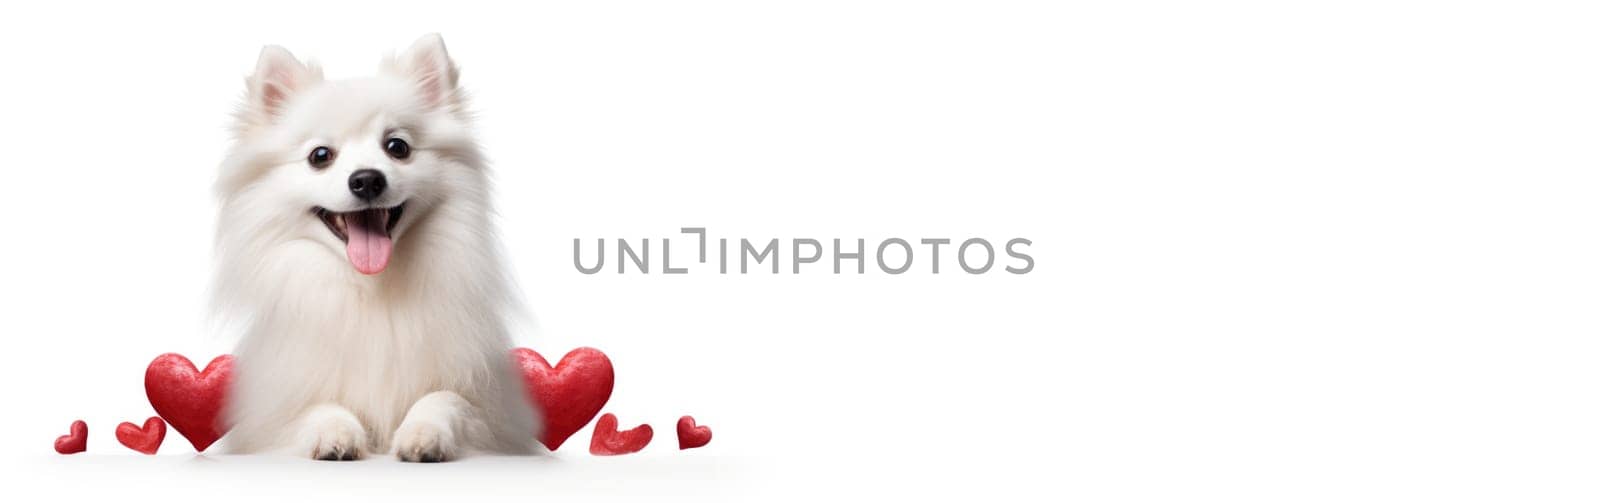 Banner of happy cute small dog with red hearts on white background celebrating Valentine day. Valentine's day, birthday, mother's, women's day, holidays concept. by JuliaDorian